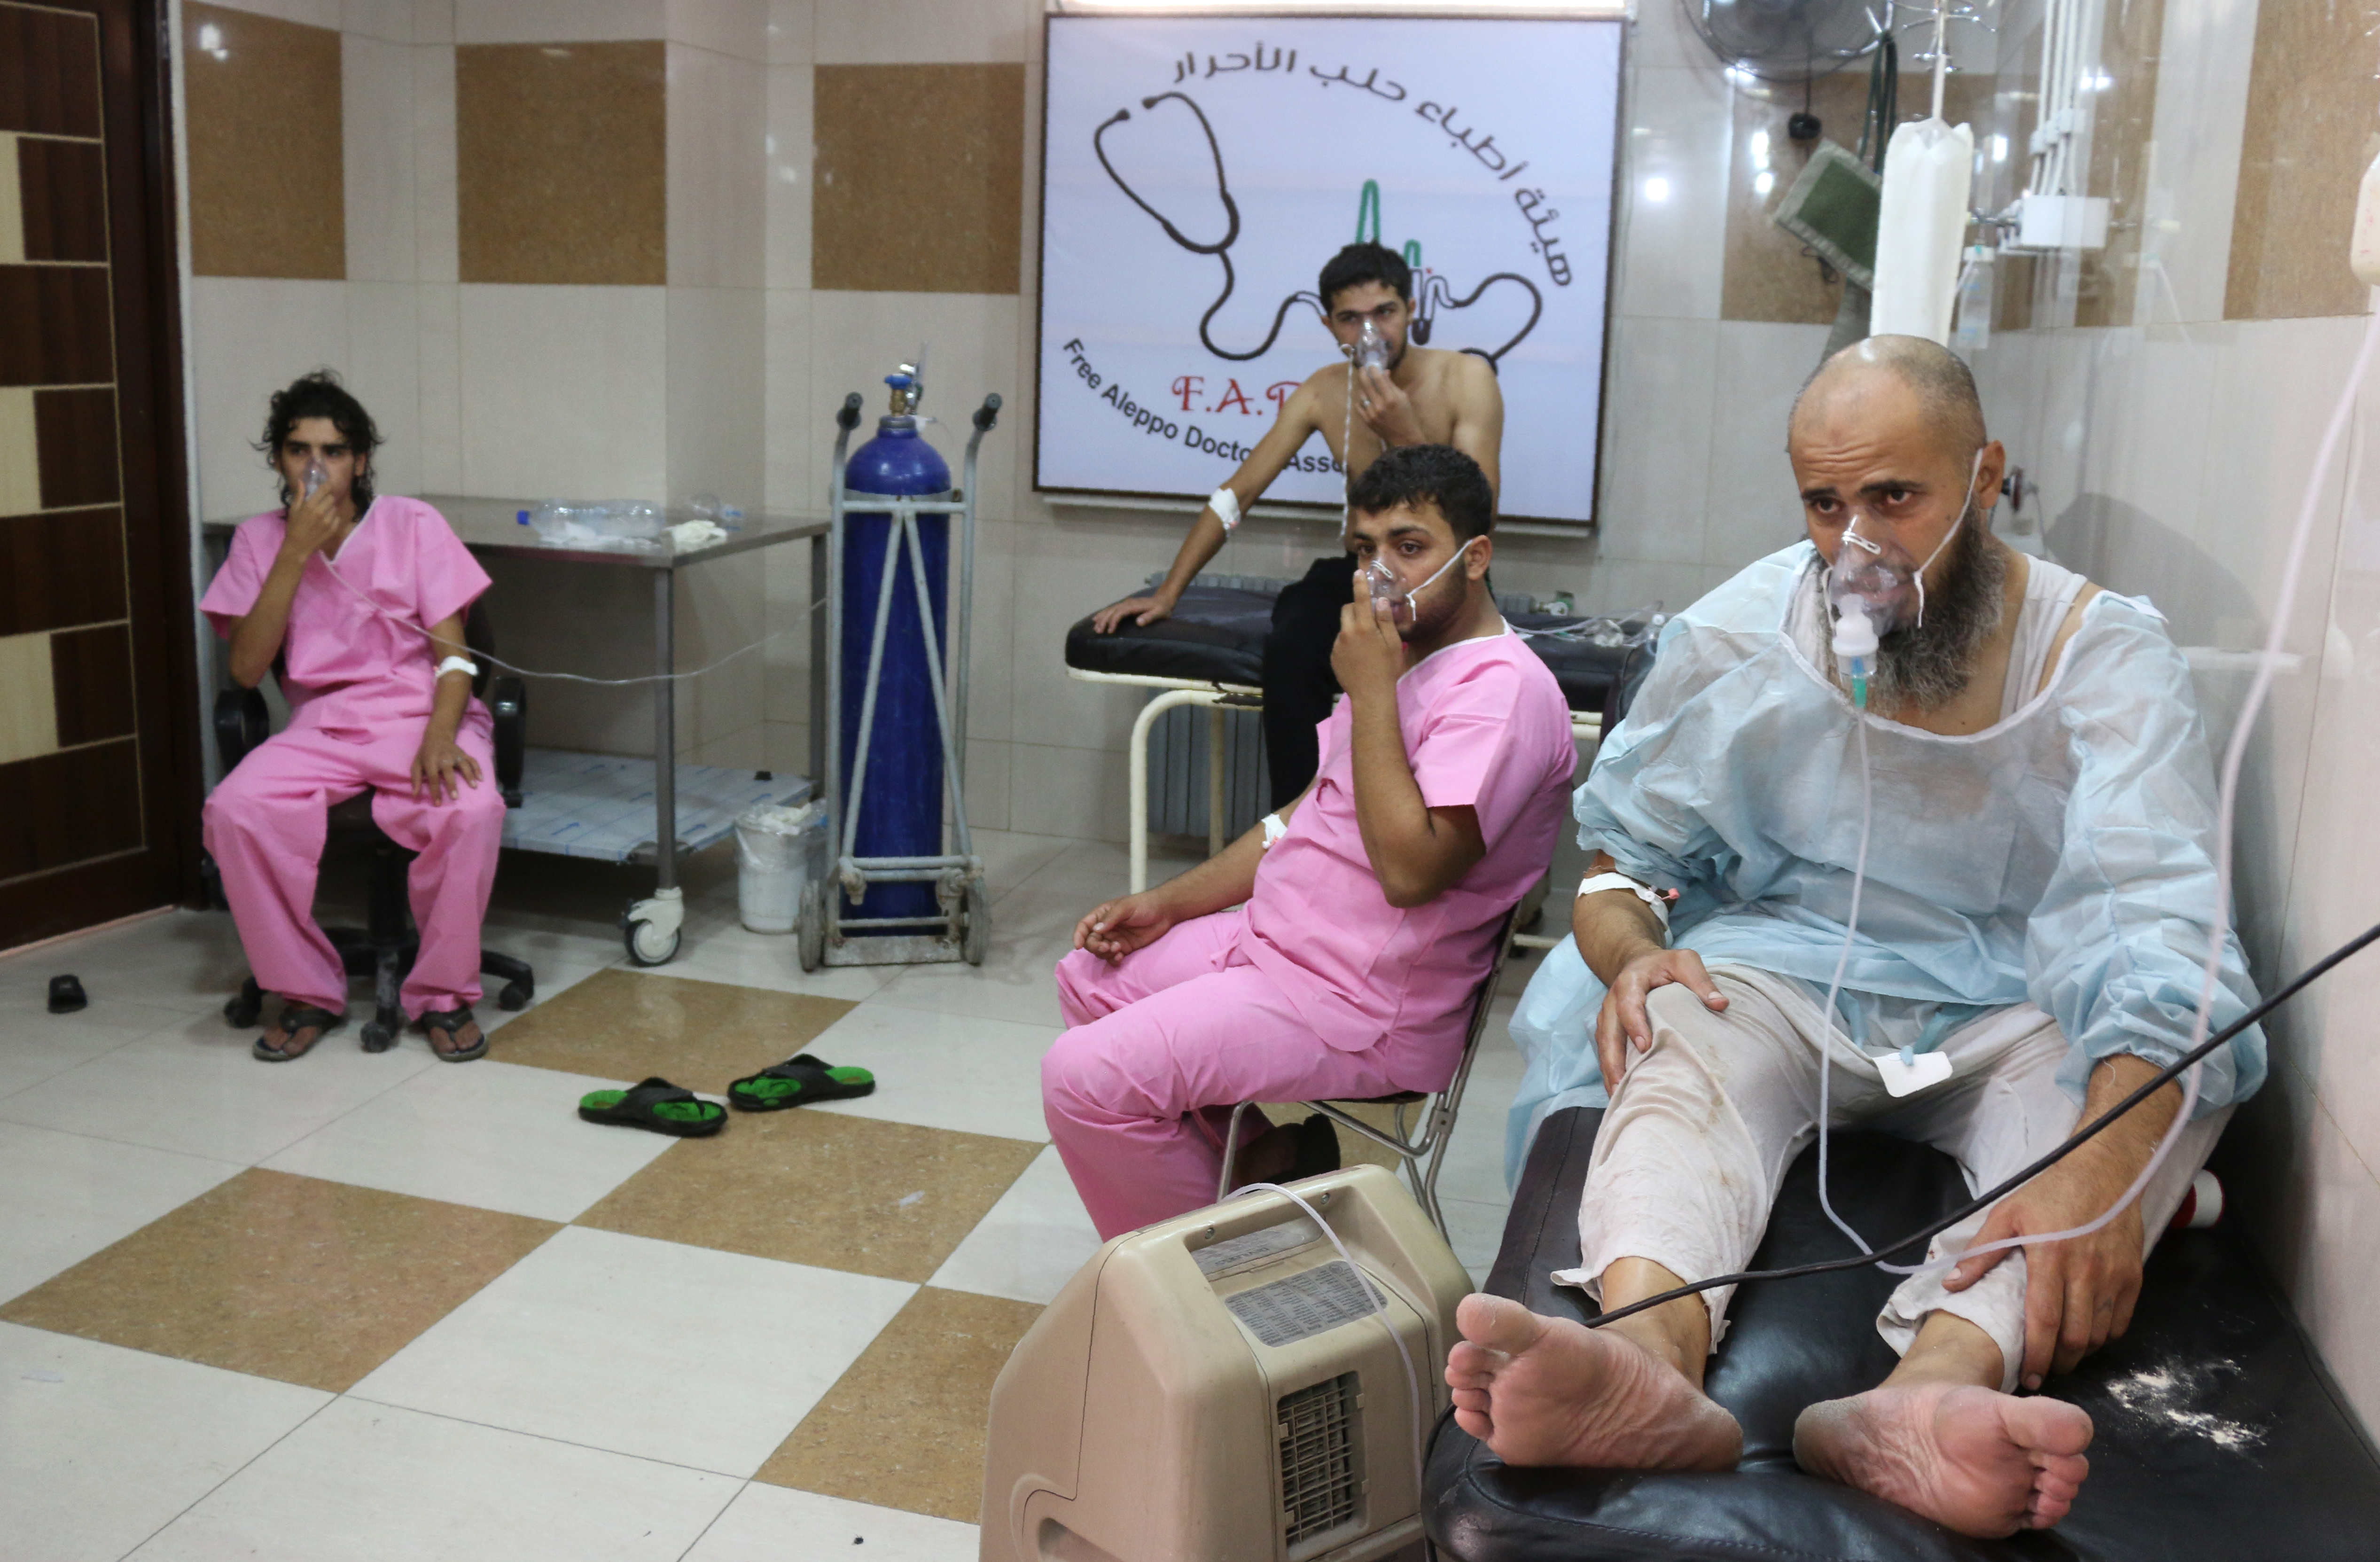 Syrians suffering from breathing difficulties are treated at a make-shift hospital in Aleppo after regime helicopters dropped barrel bombs on the rebel-held Sukkari neighbourhood of the northern Syrian city on September 6, 2016.  The Britain-based Syrian Observatory for Human Rights said the bombs hit the Sukkari neighbourhood and that more than 70 people "most of them civilians" were treated for choking symptoms.  / AFP PHOTO / THAER MOHAMMED